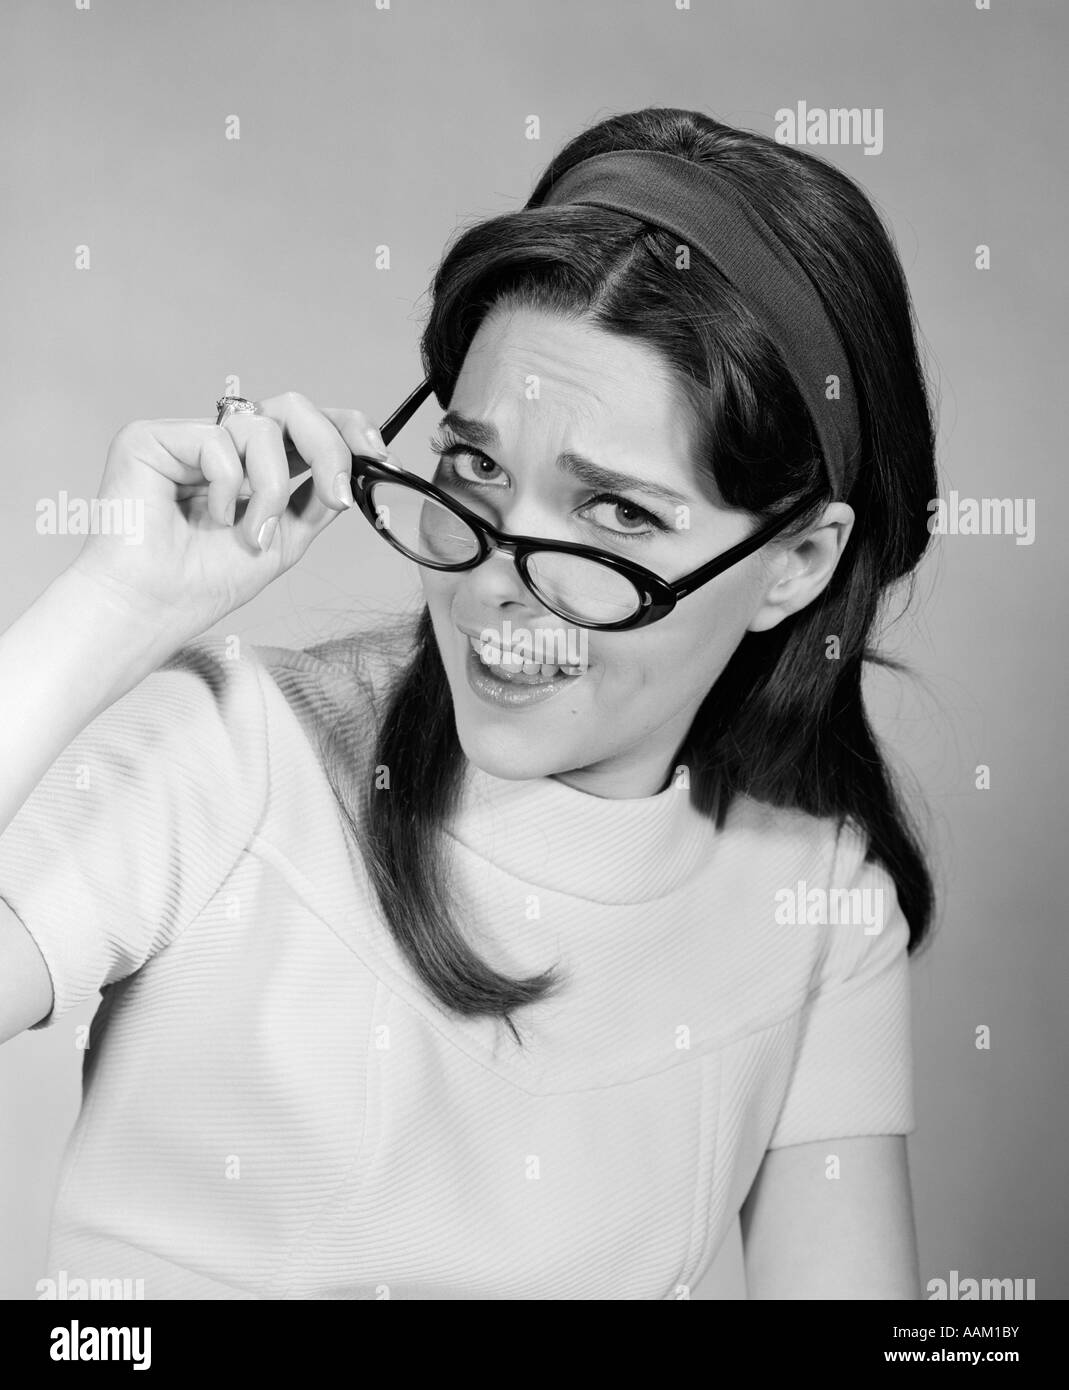 1960s WOMAN BRUNETTE LONG HAIR REMOVING PUTTING ON EYE GLASSES FUNNY FACIAL EXPRESSION LOOKING AT CAMERA Stock Photo